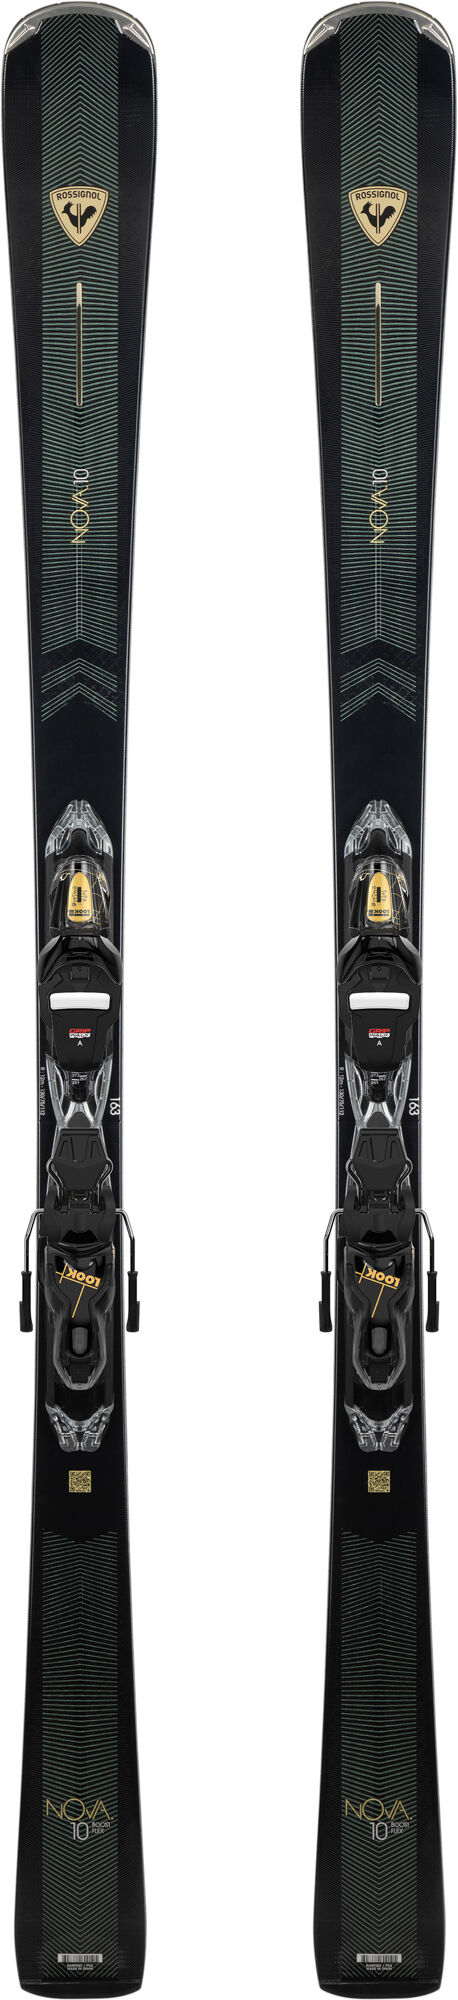 Alpine skis and equipment: skis, bindings and poles | Rossignol